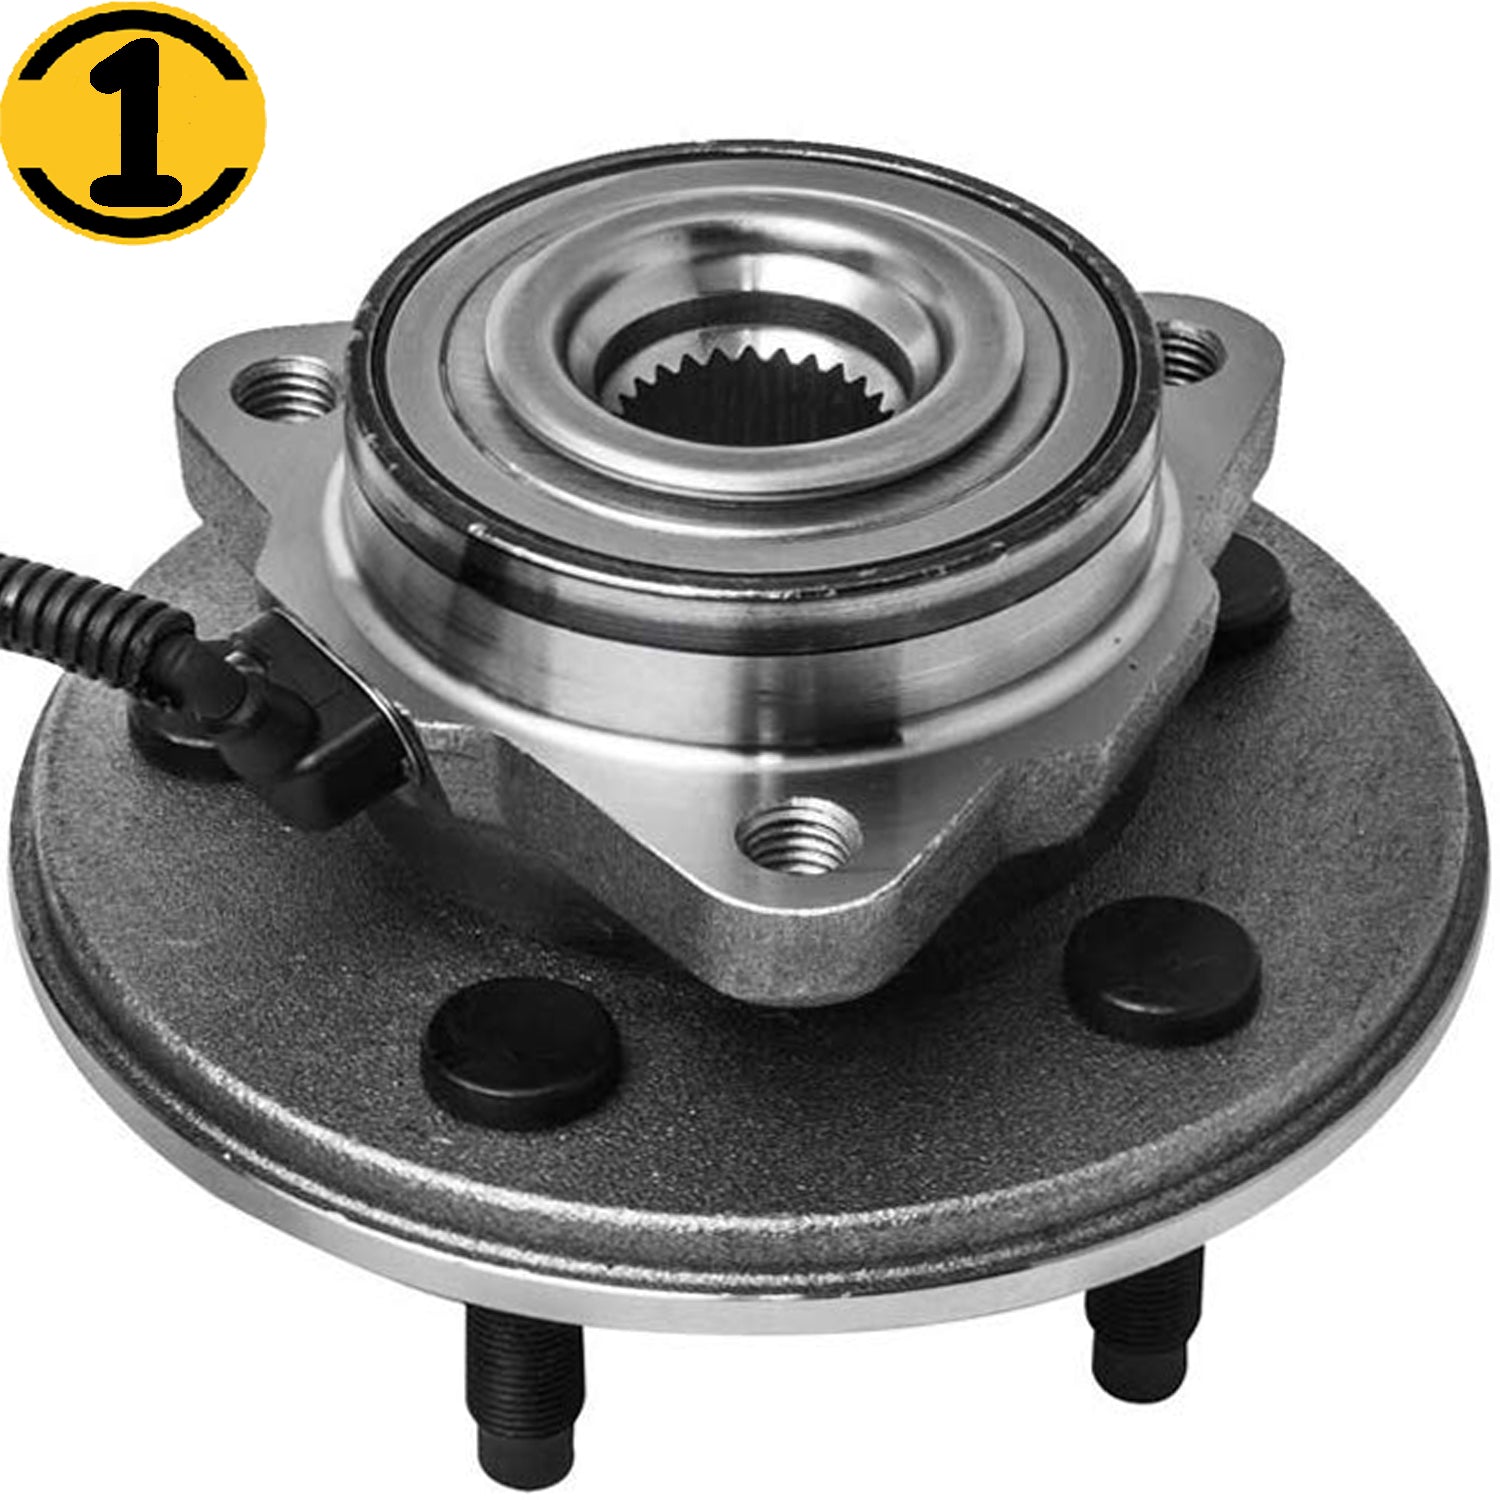 MotorbyMotor 515050 Front Wheel Bearing Hub Assembly with 5 Lugs Fits for Ford Explorer (4 Door Models), Mercury Mountaineer, Lincoln Aviator (All Models) Hub Bearing w/ABS MotorbyMotor